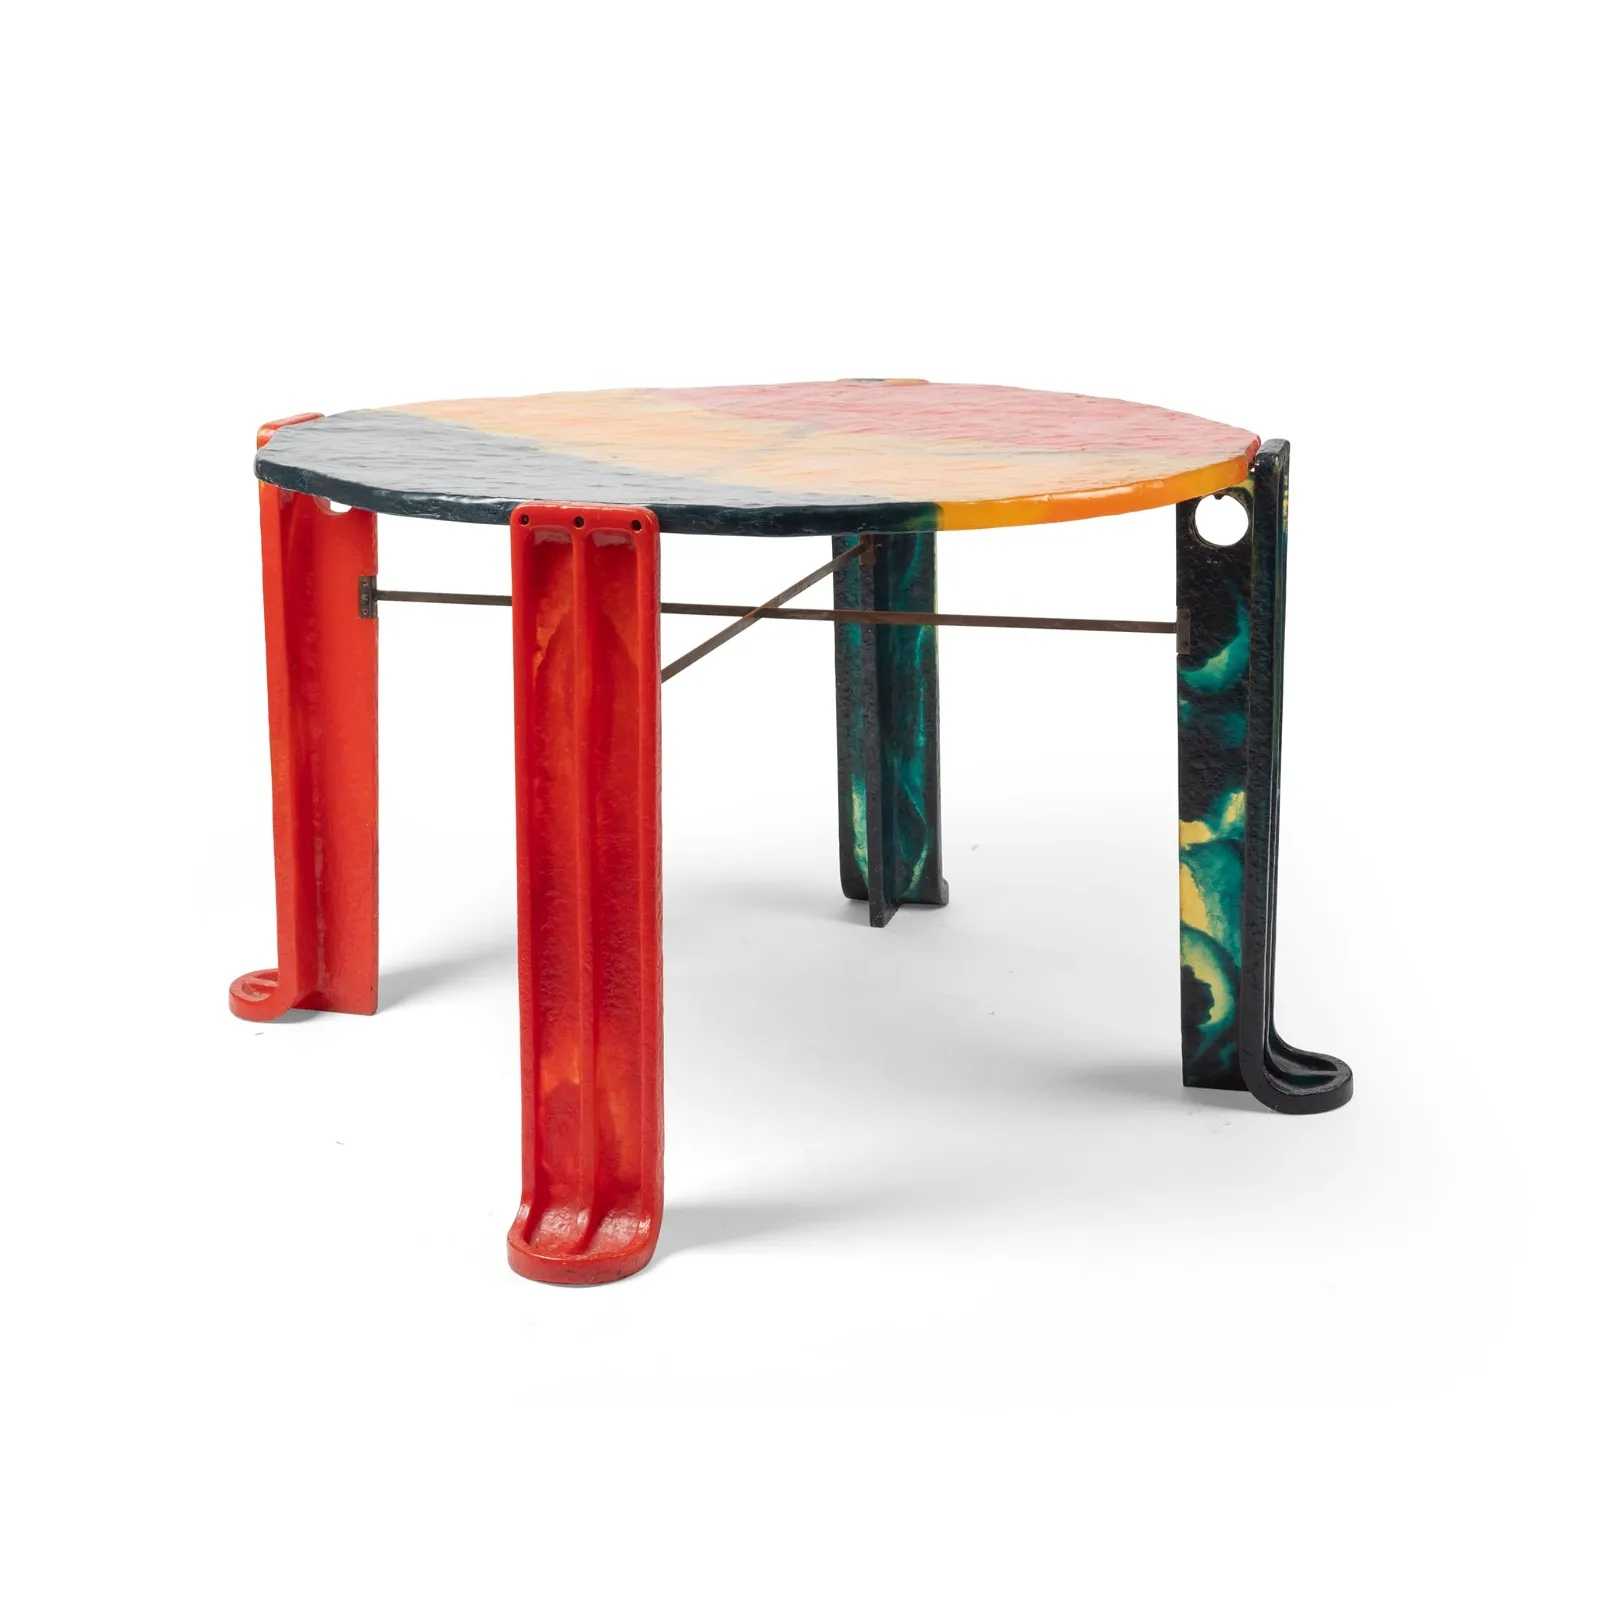 Chait-Day 1996 poured resin and enameled steel Waffle Table, which sold for £8,000 ($10,040, or $13,150 with buyer’s premium) at Lyon & Turnbull.